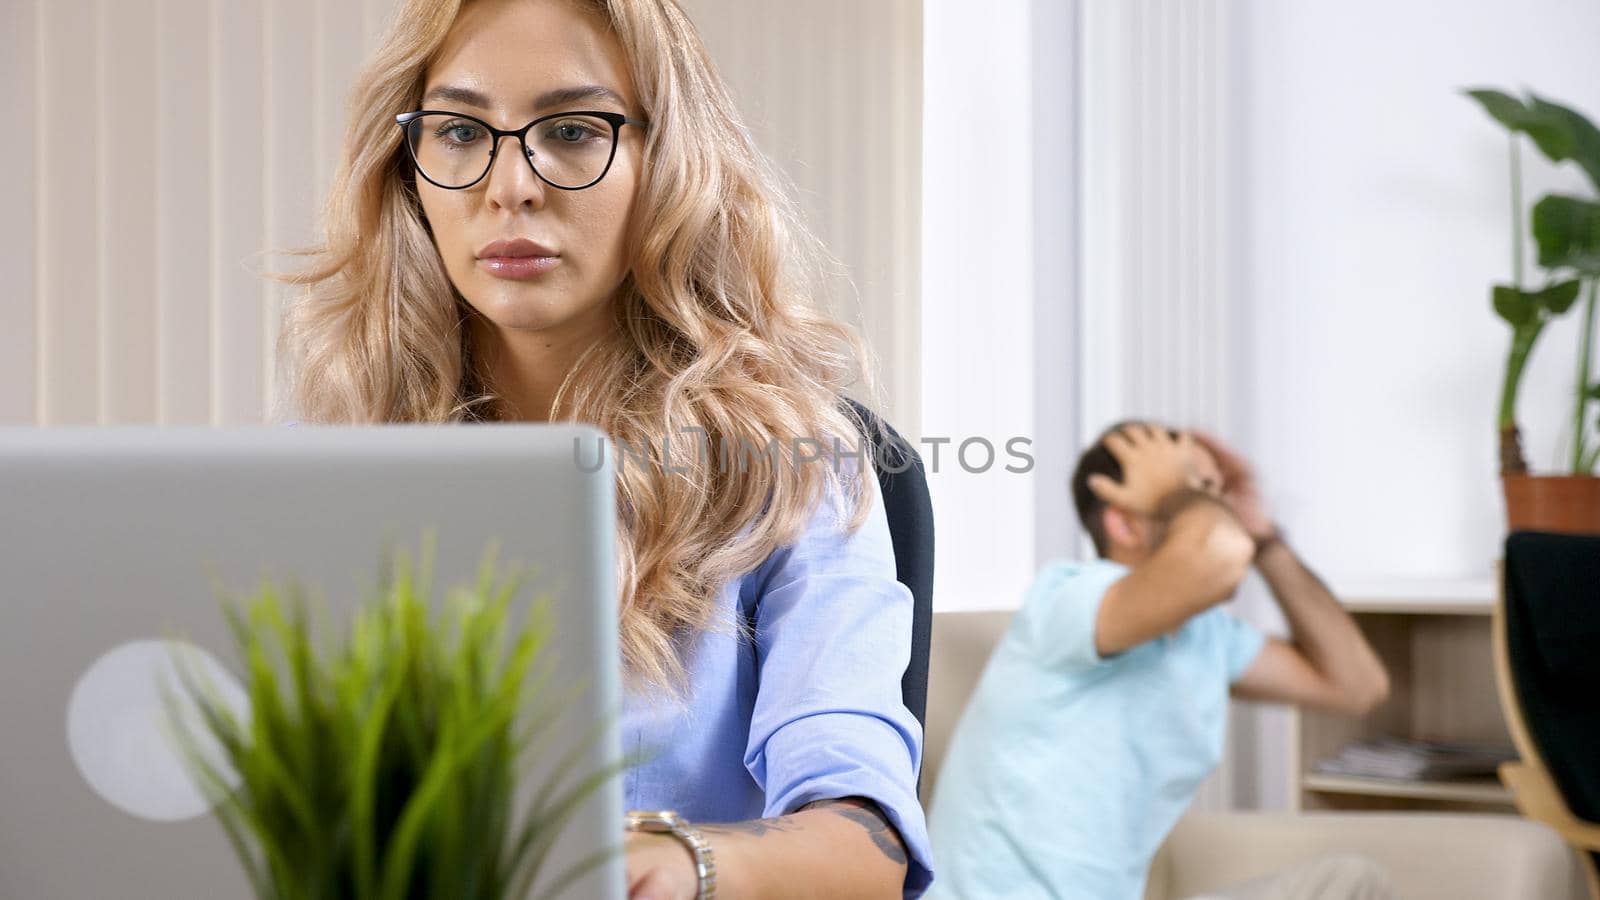 Freelancer woman working on the computer laptop in the house while the husband is watching TV in the background